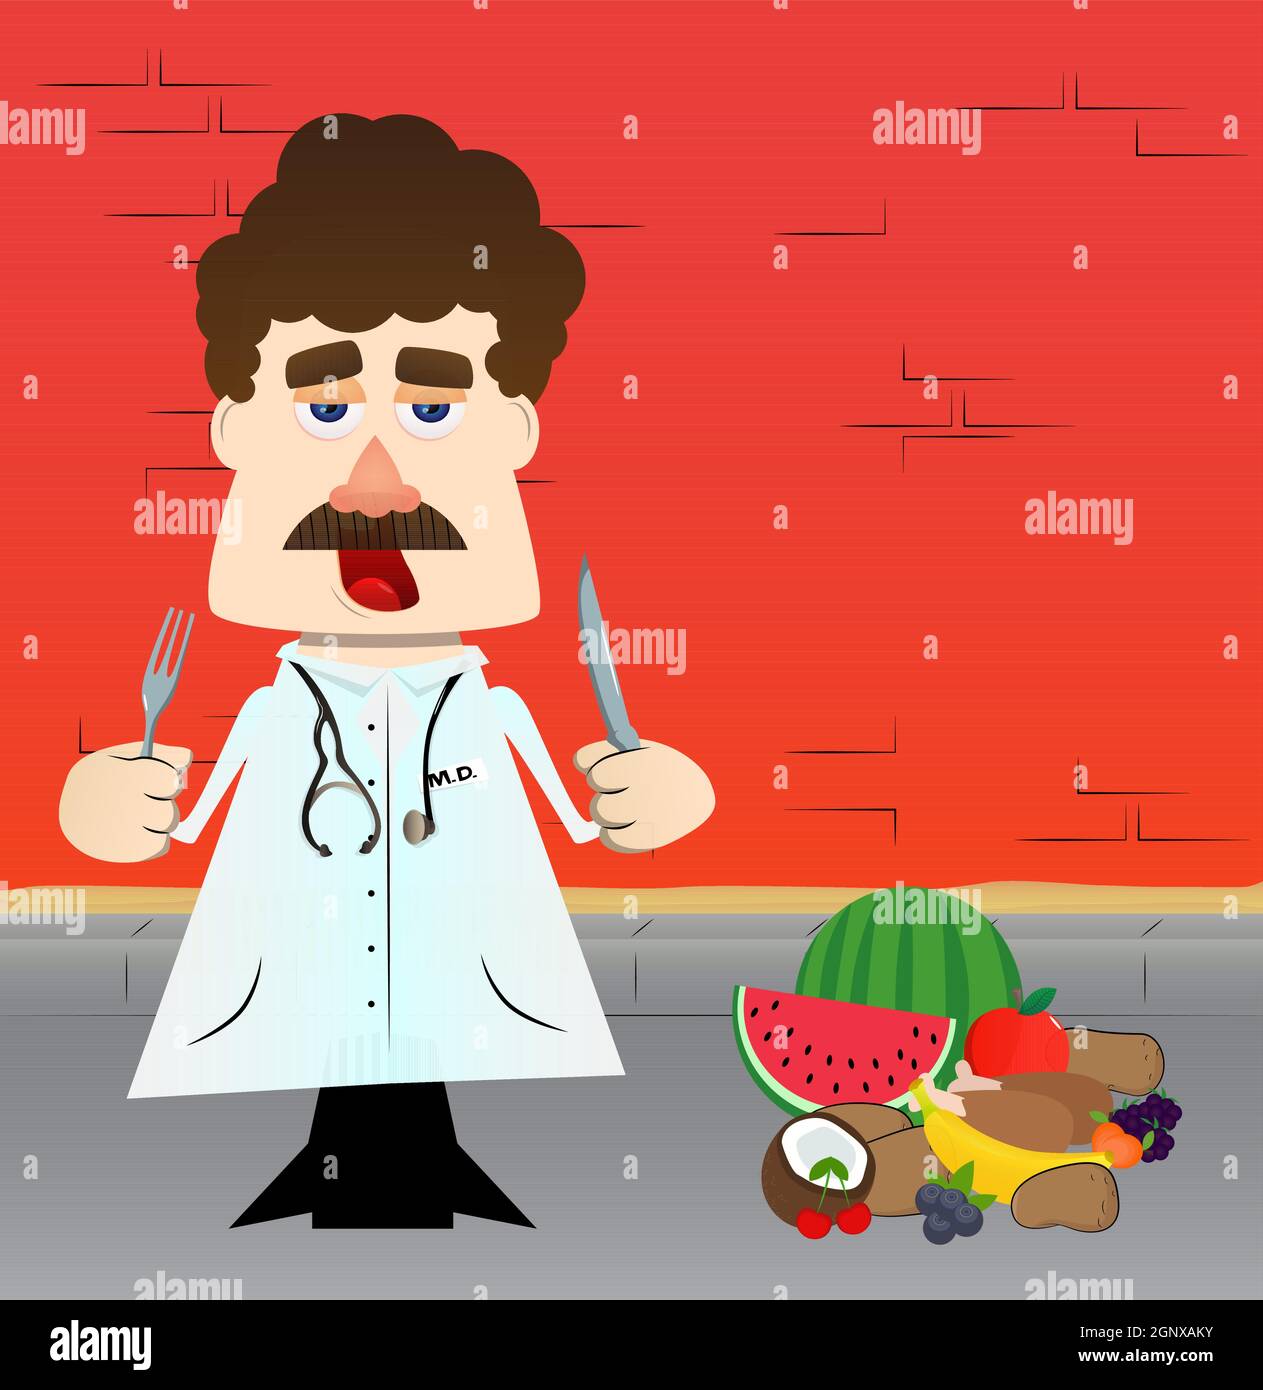 Funny Cartoon Doctor Holding Up A Knife And Fork Stock Vector Image